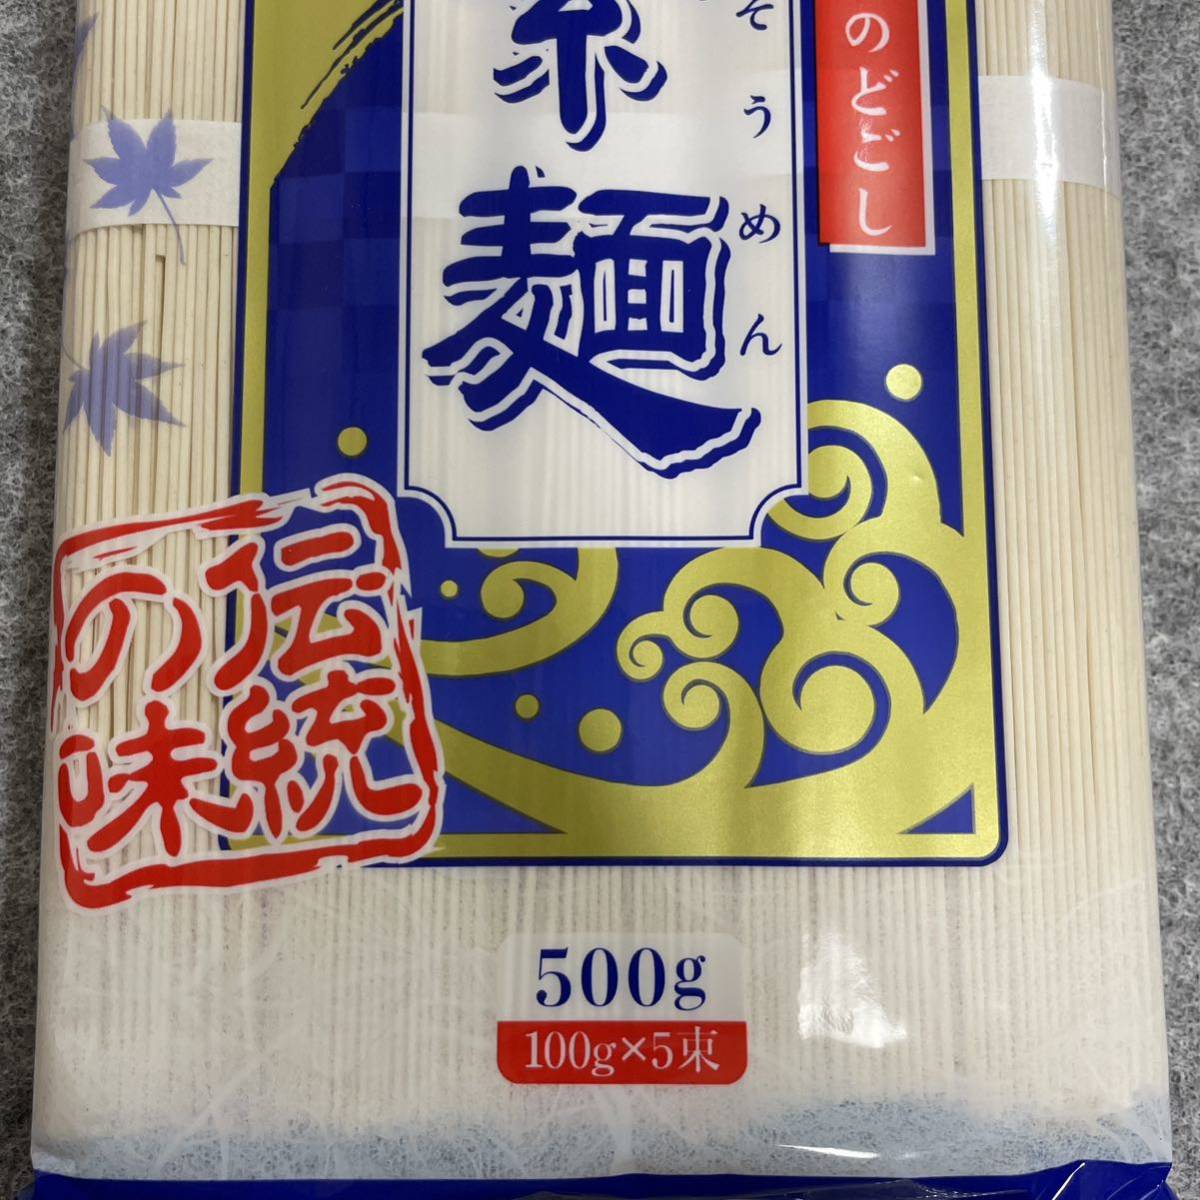  many . water made law .. noodle JA Ehime want . vermicelli 500g×2 piece set 